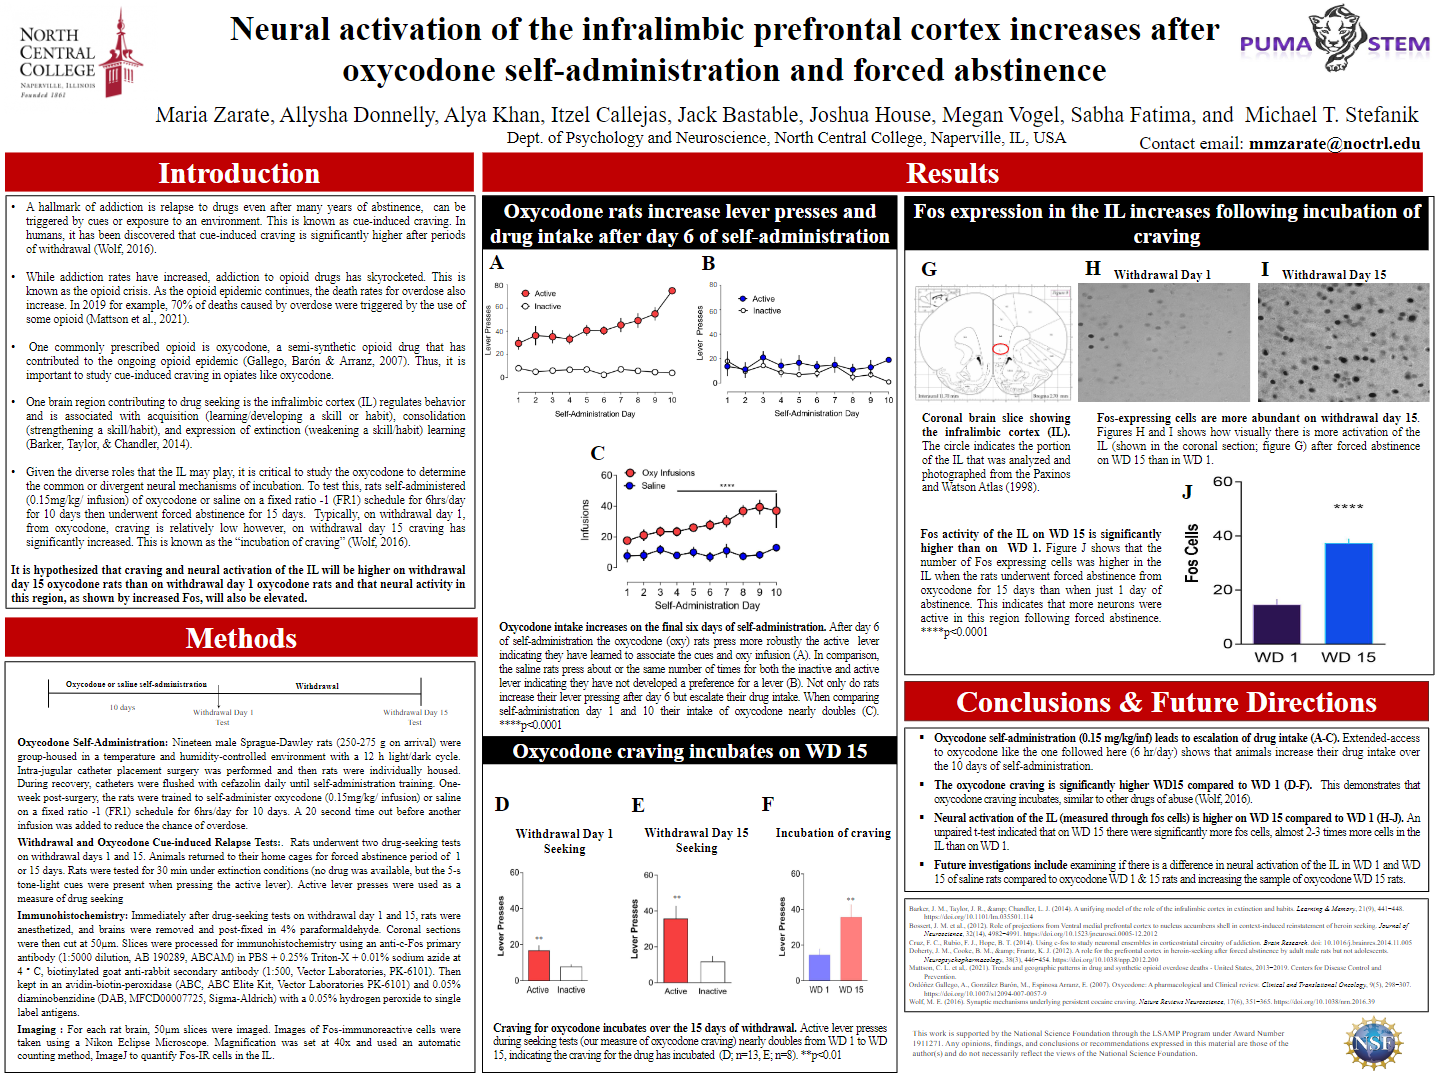 Research poster example from Maria Zarate.